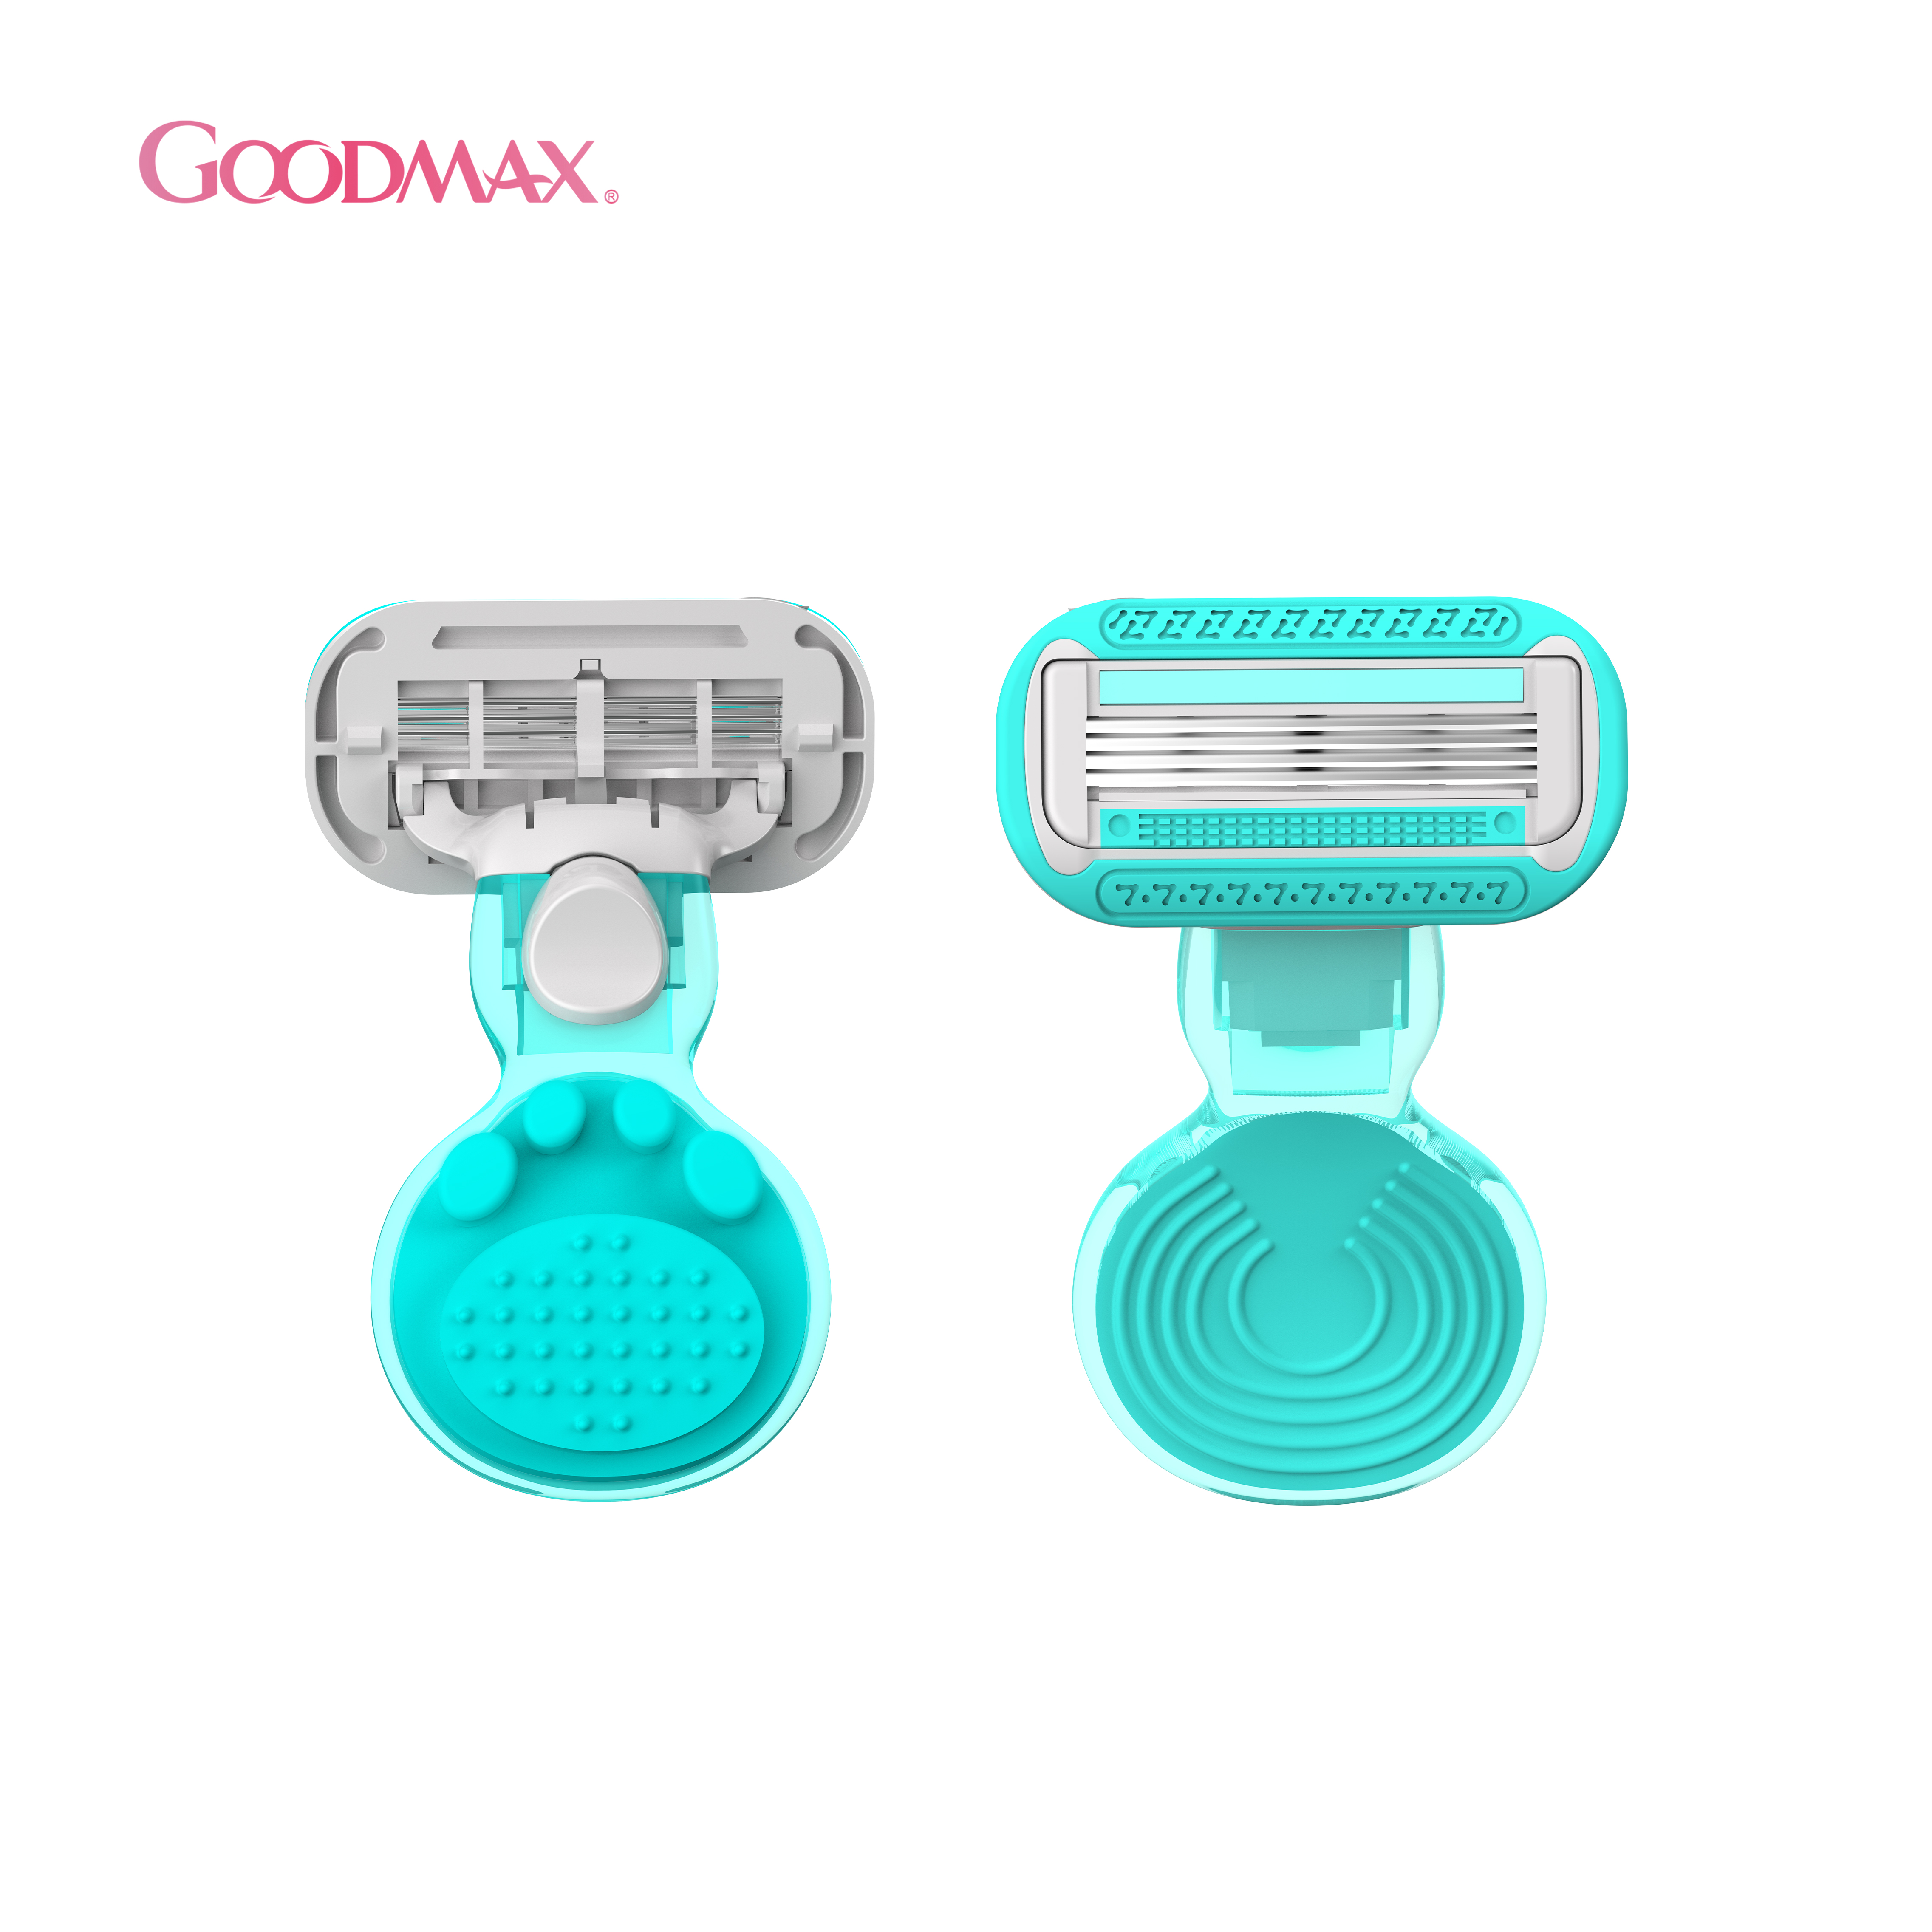 High definition Razor - Small size lady’s razor in nice plastic box for easy carry 8102 – Jiali